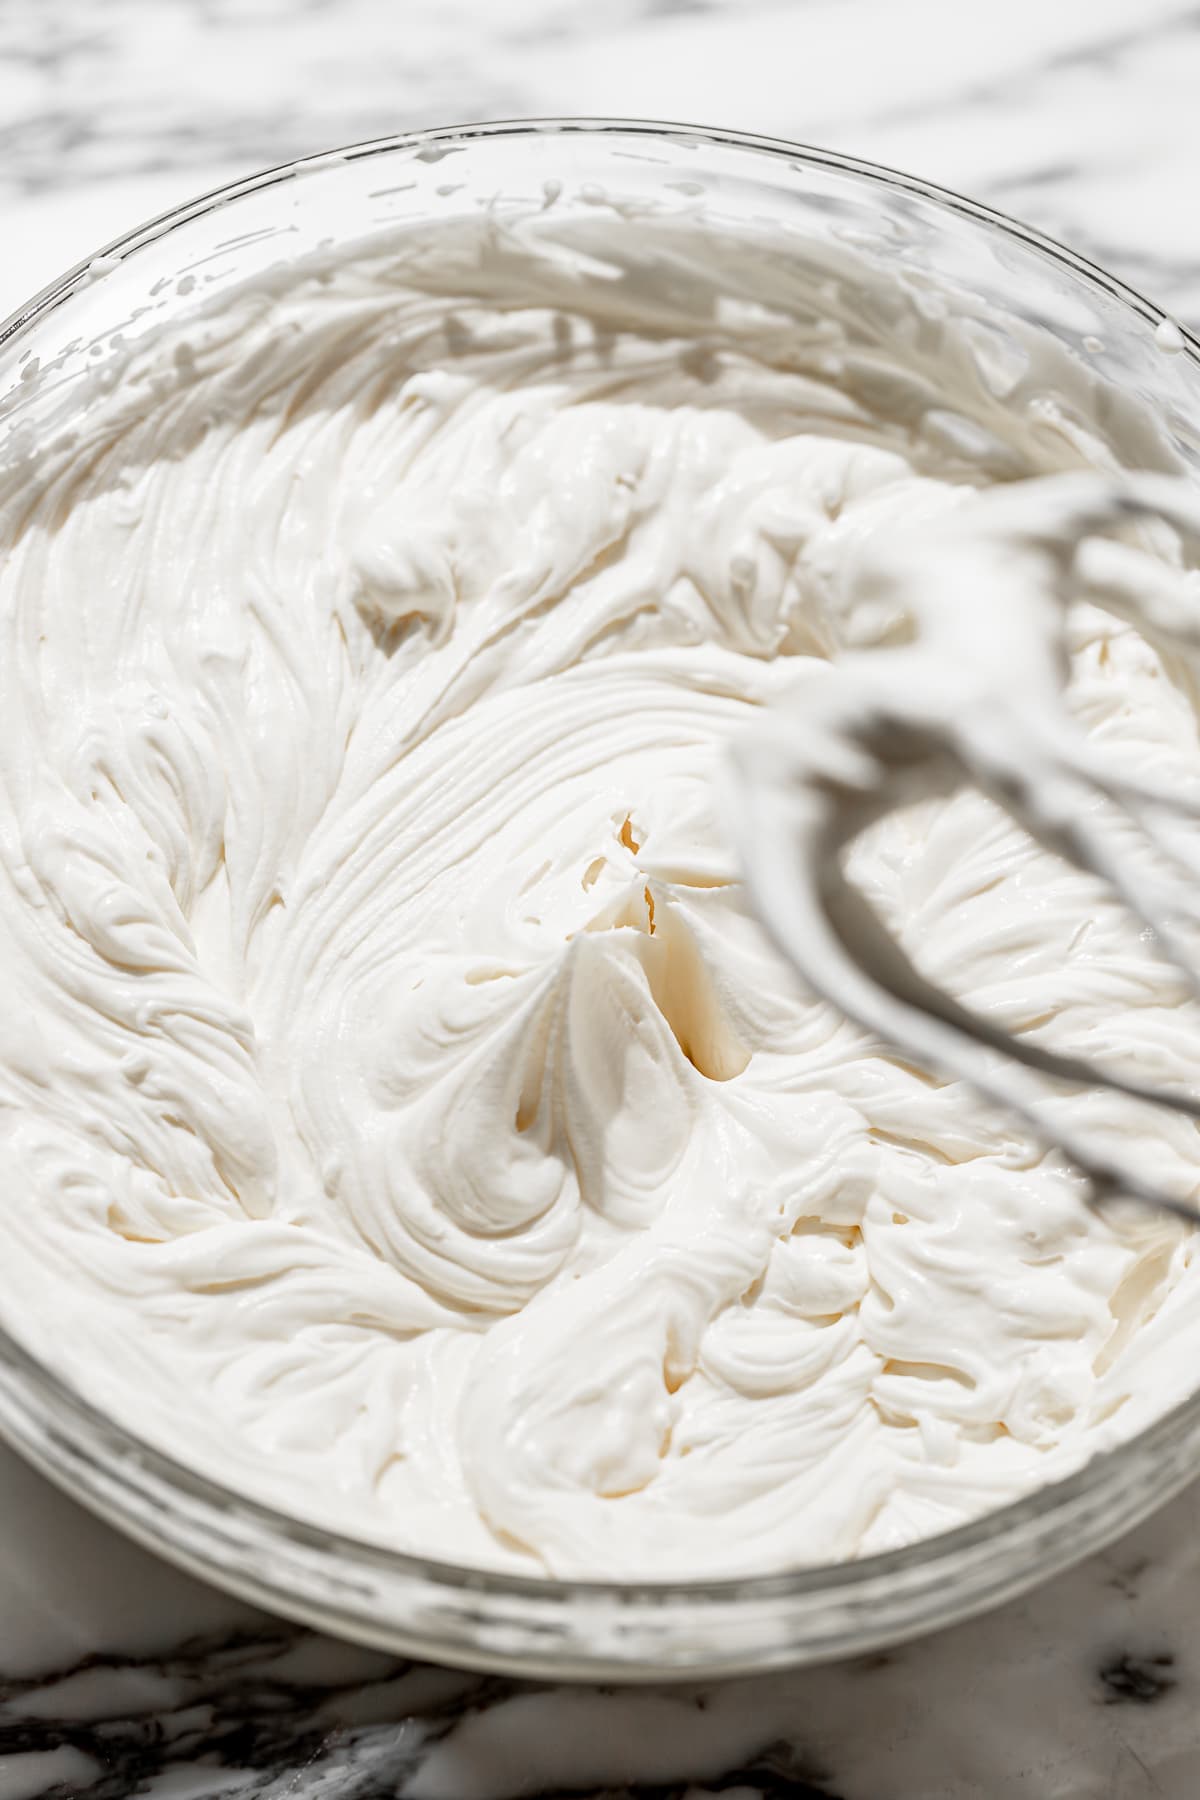 mascarpone frosting whipped in a glass bowl.